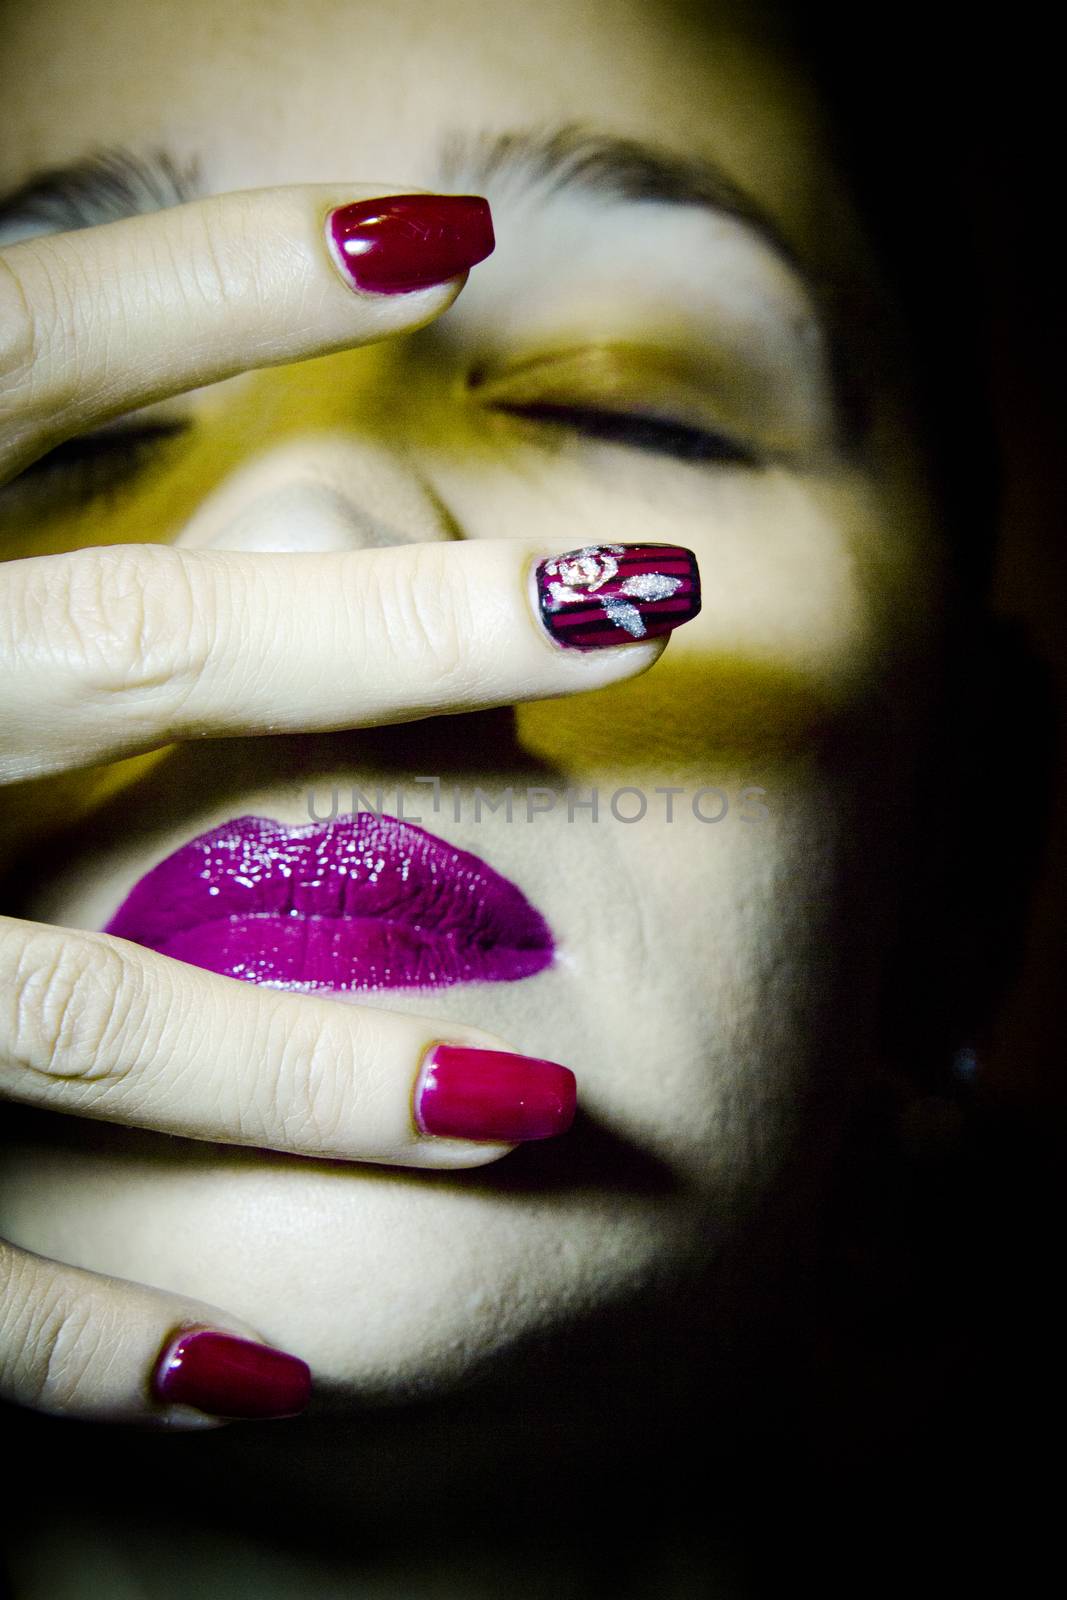 Portrait of woman with hand over face. Red makeup lips and nails